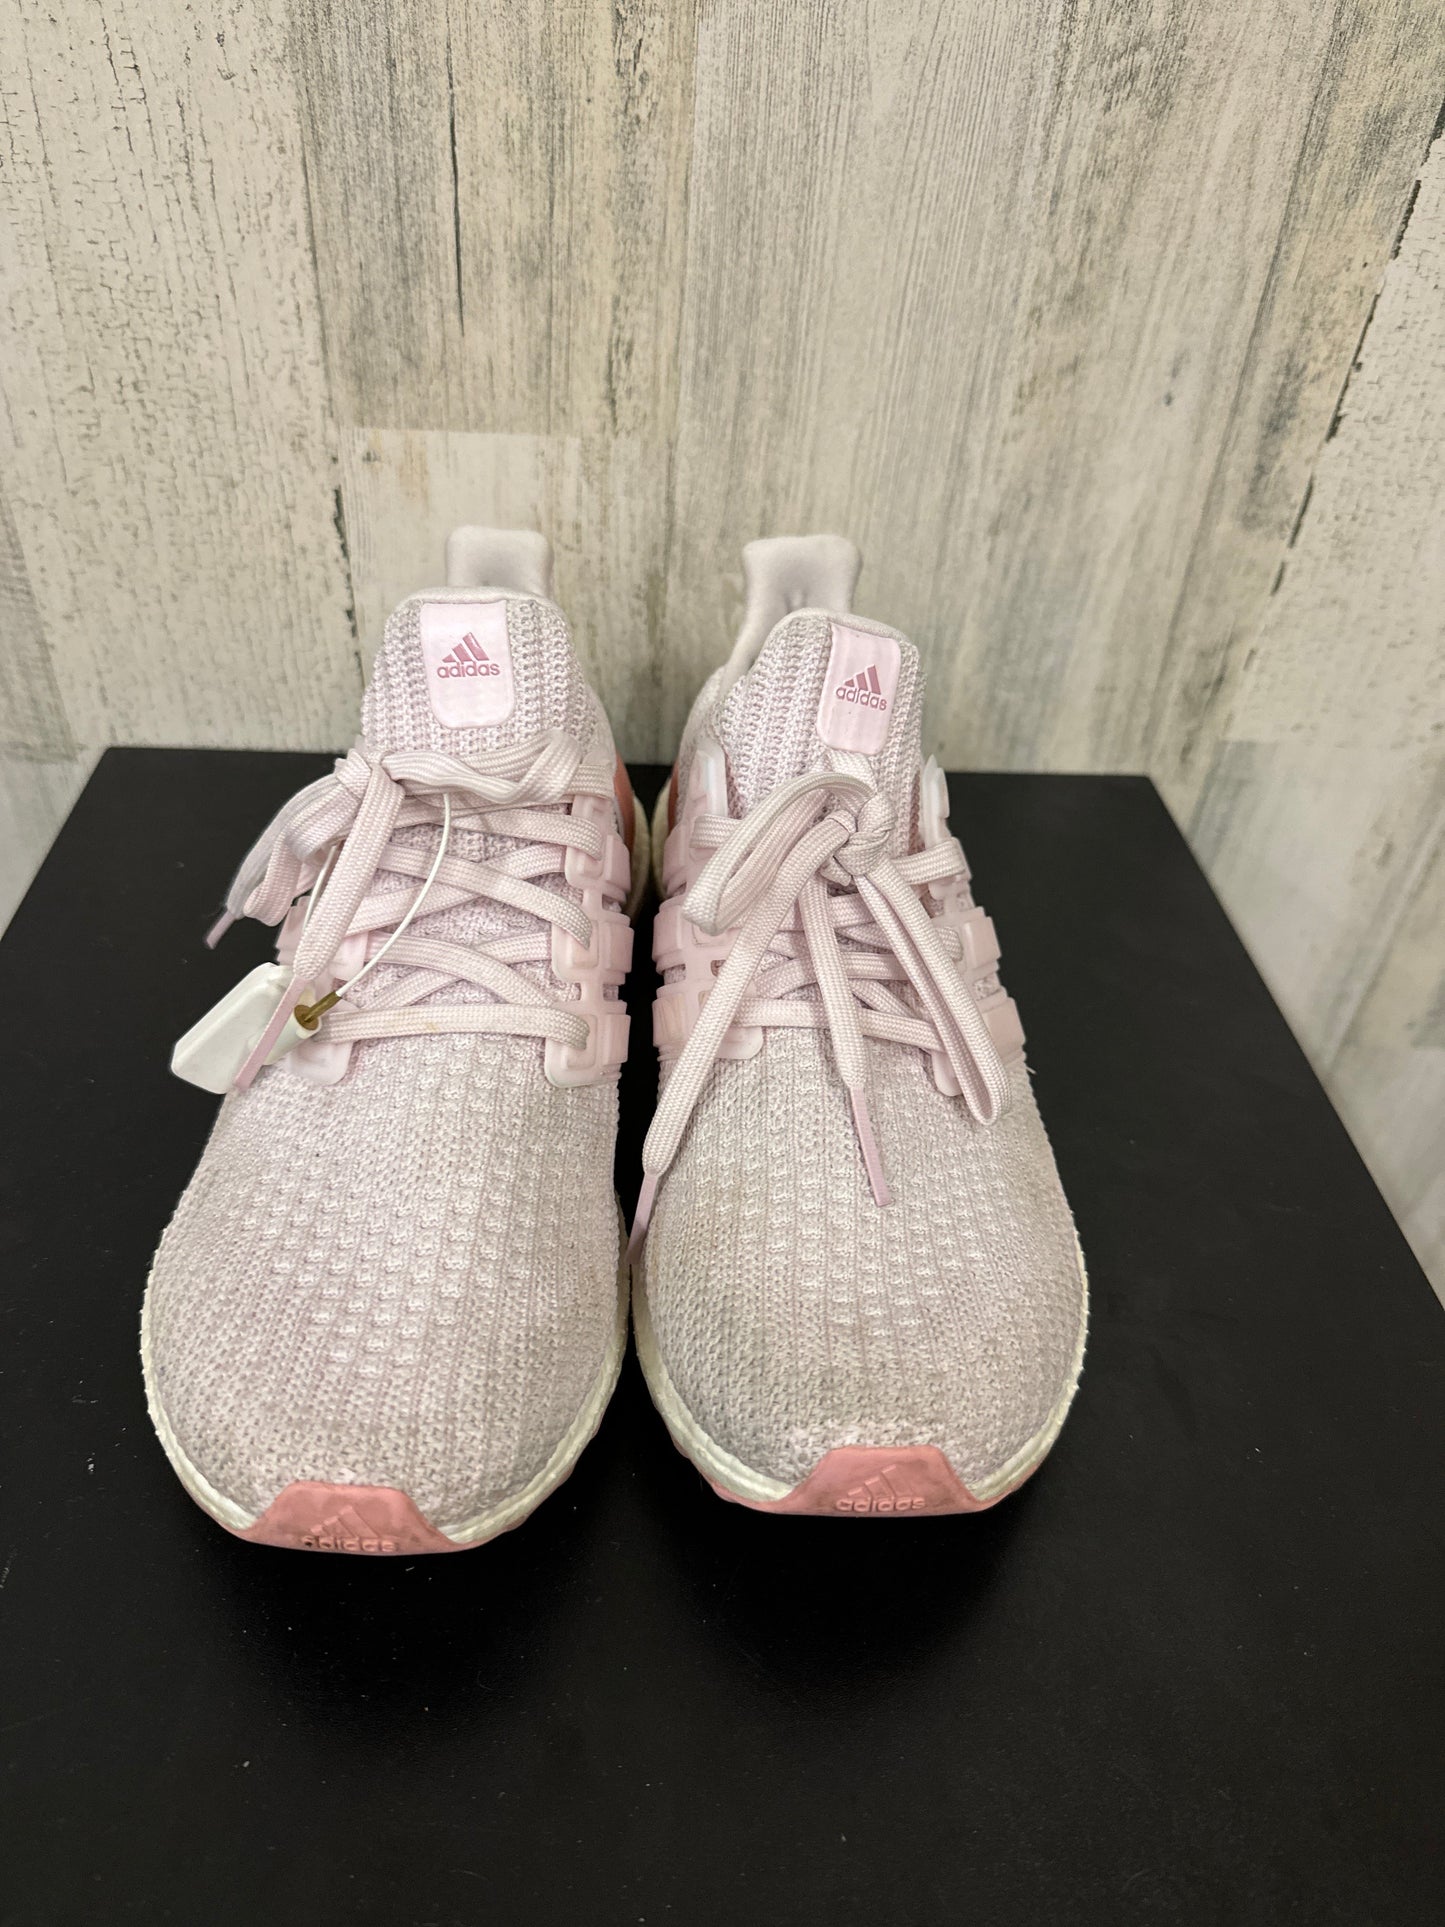 Pink Shoes Athletic Adidas, Size 8.5